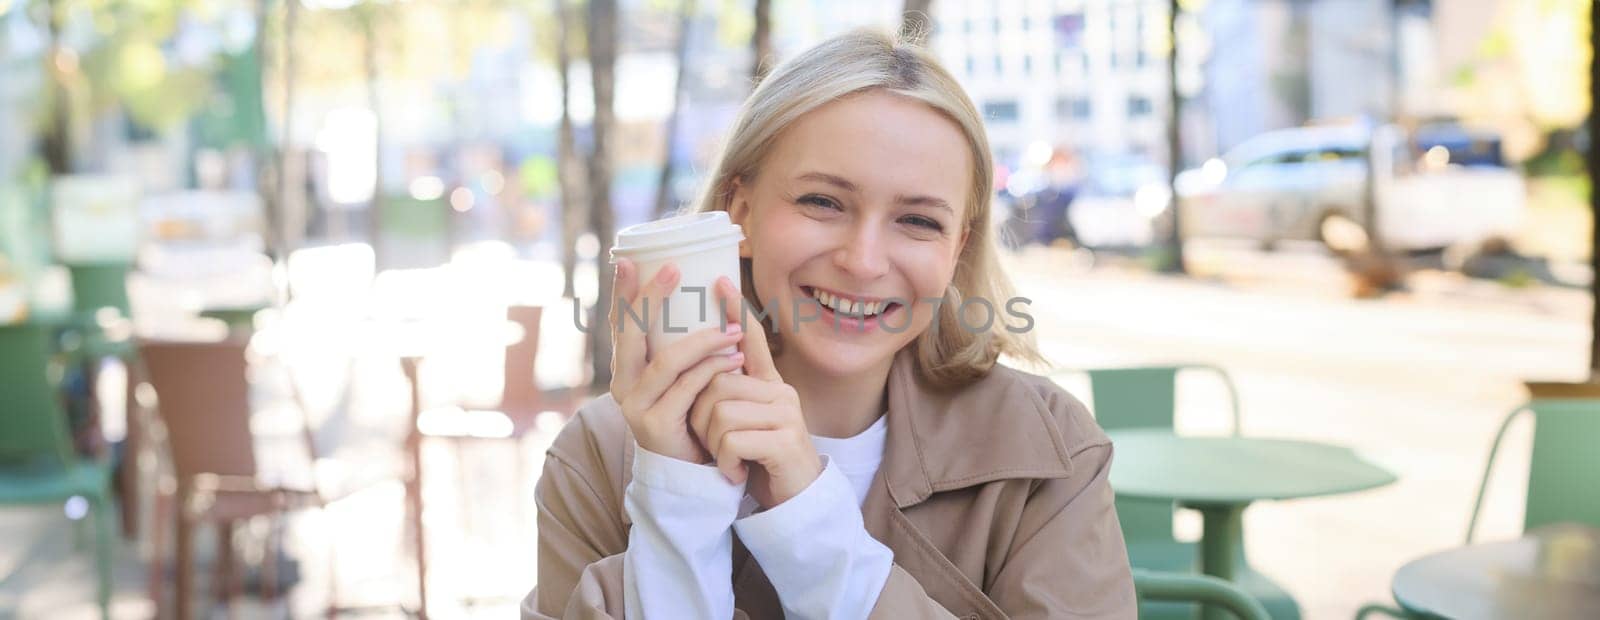 Close up portrait of smiling blonde woman, university student, holding cup of coffee, warming up her hands on chilly autumn day, sitting in outdoor cafe, laughing at camera.